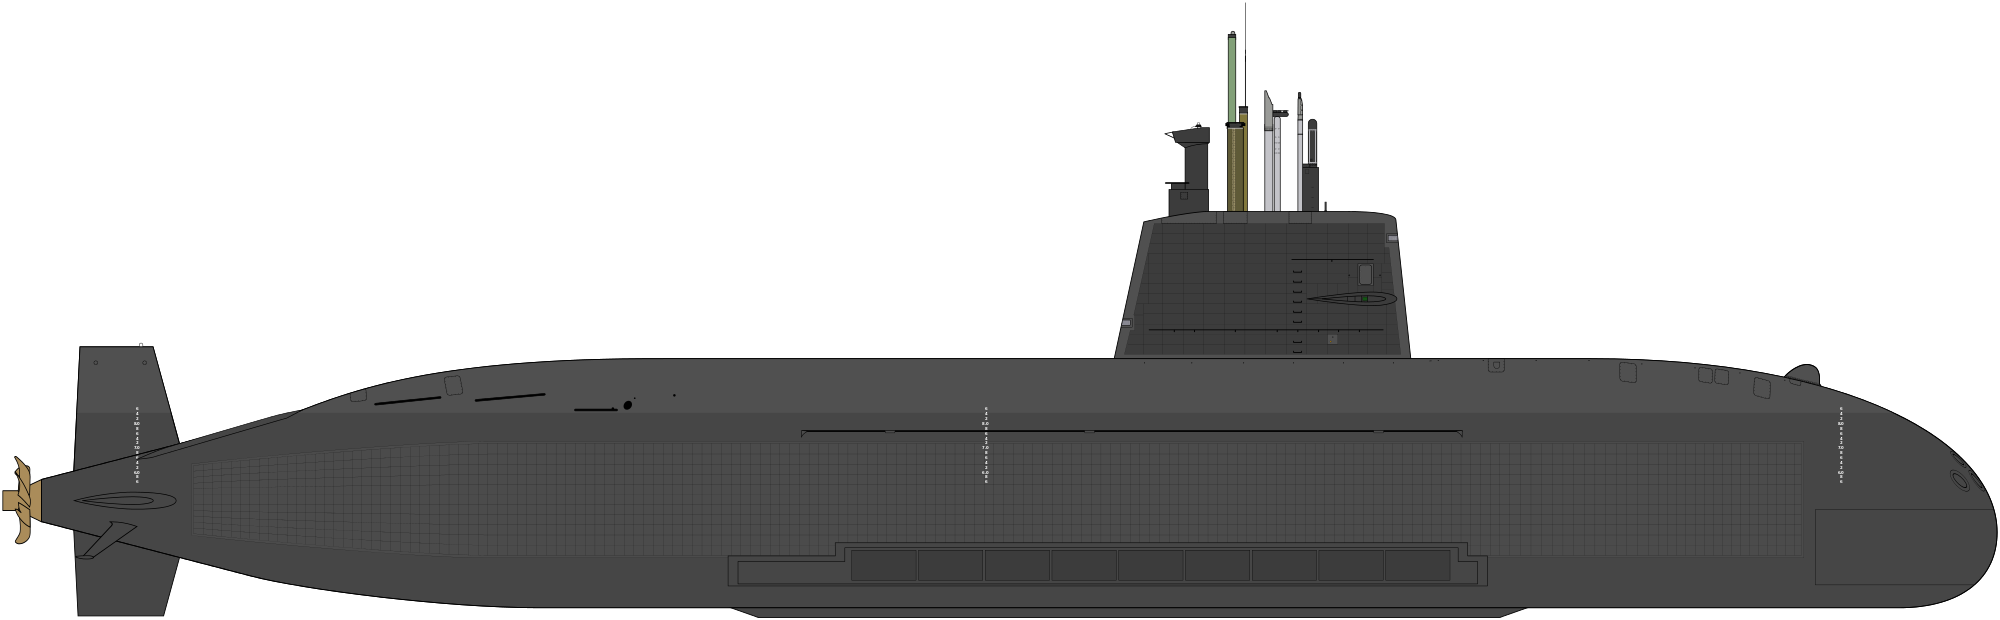 Submarine svg #20, Download drawings